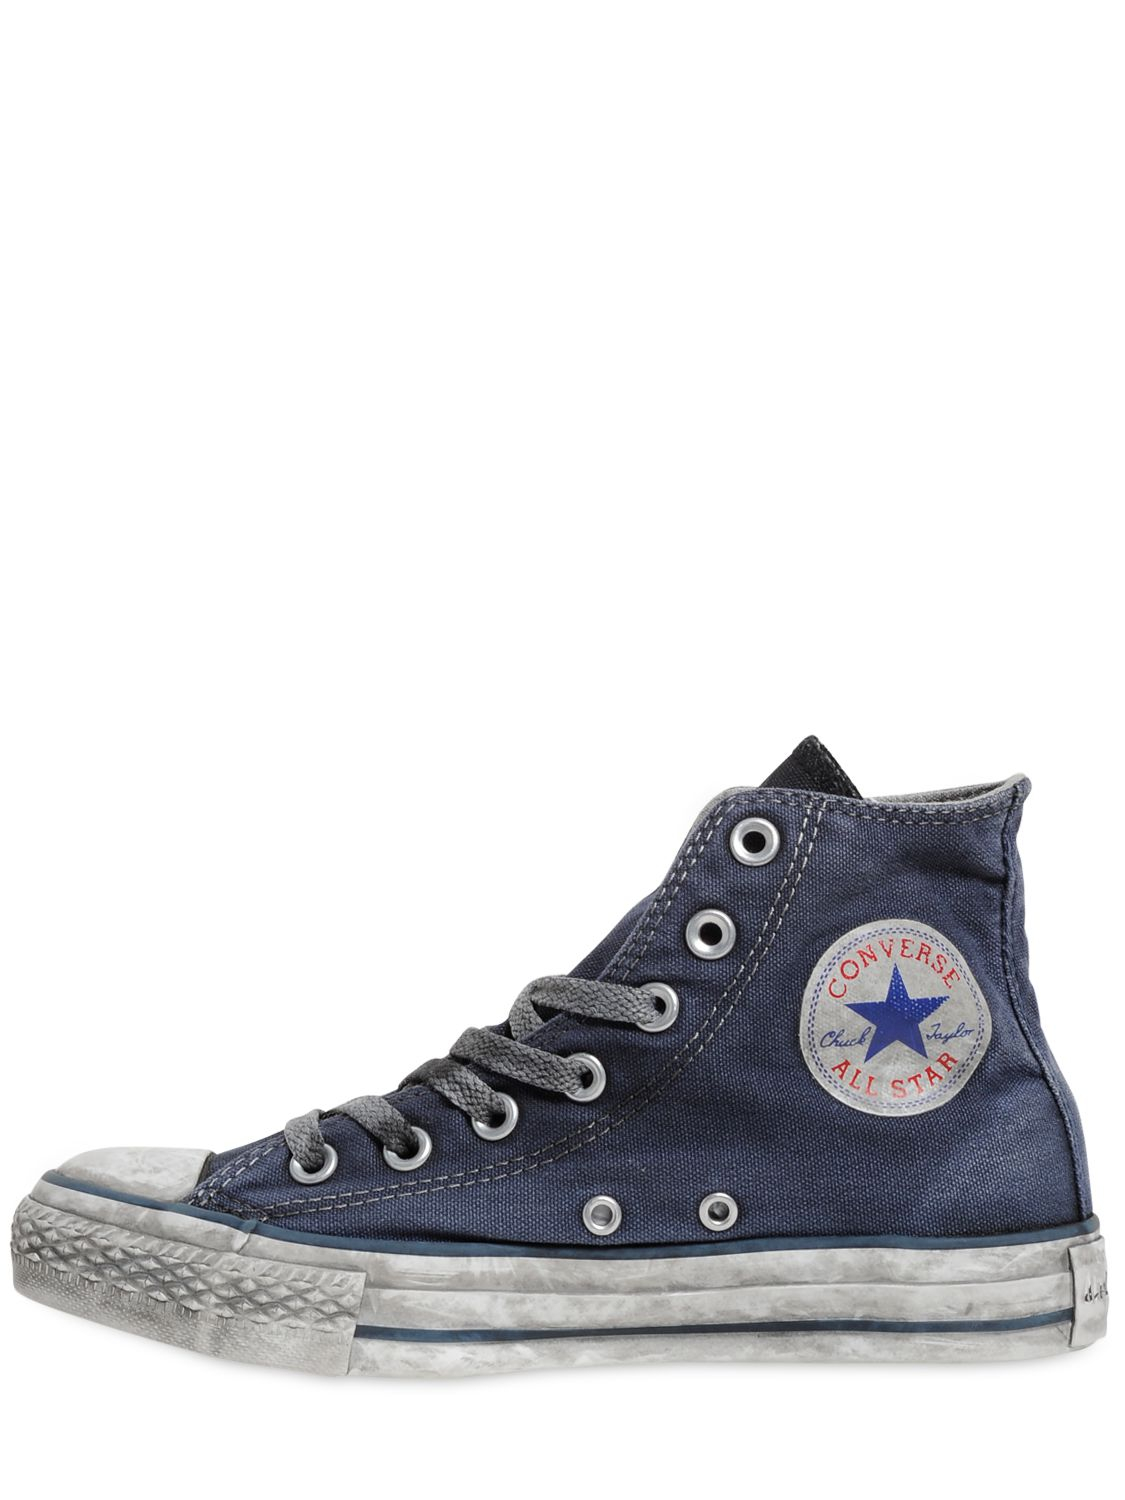 Converse Limited Edition All Stars Sneakers in Navy (Blue) for Men | Lyst